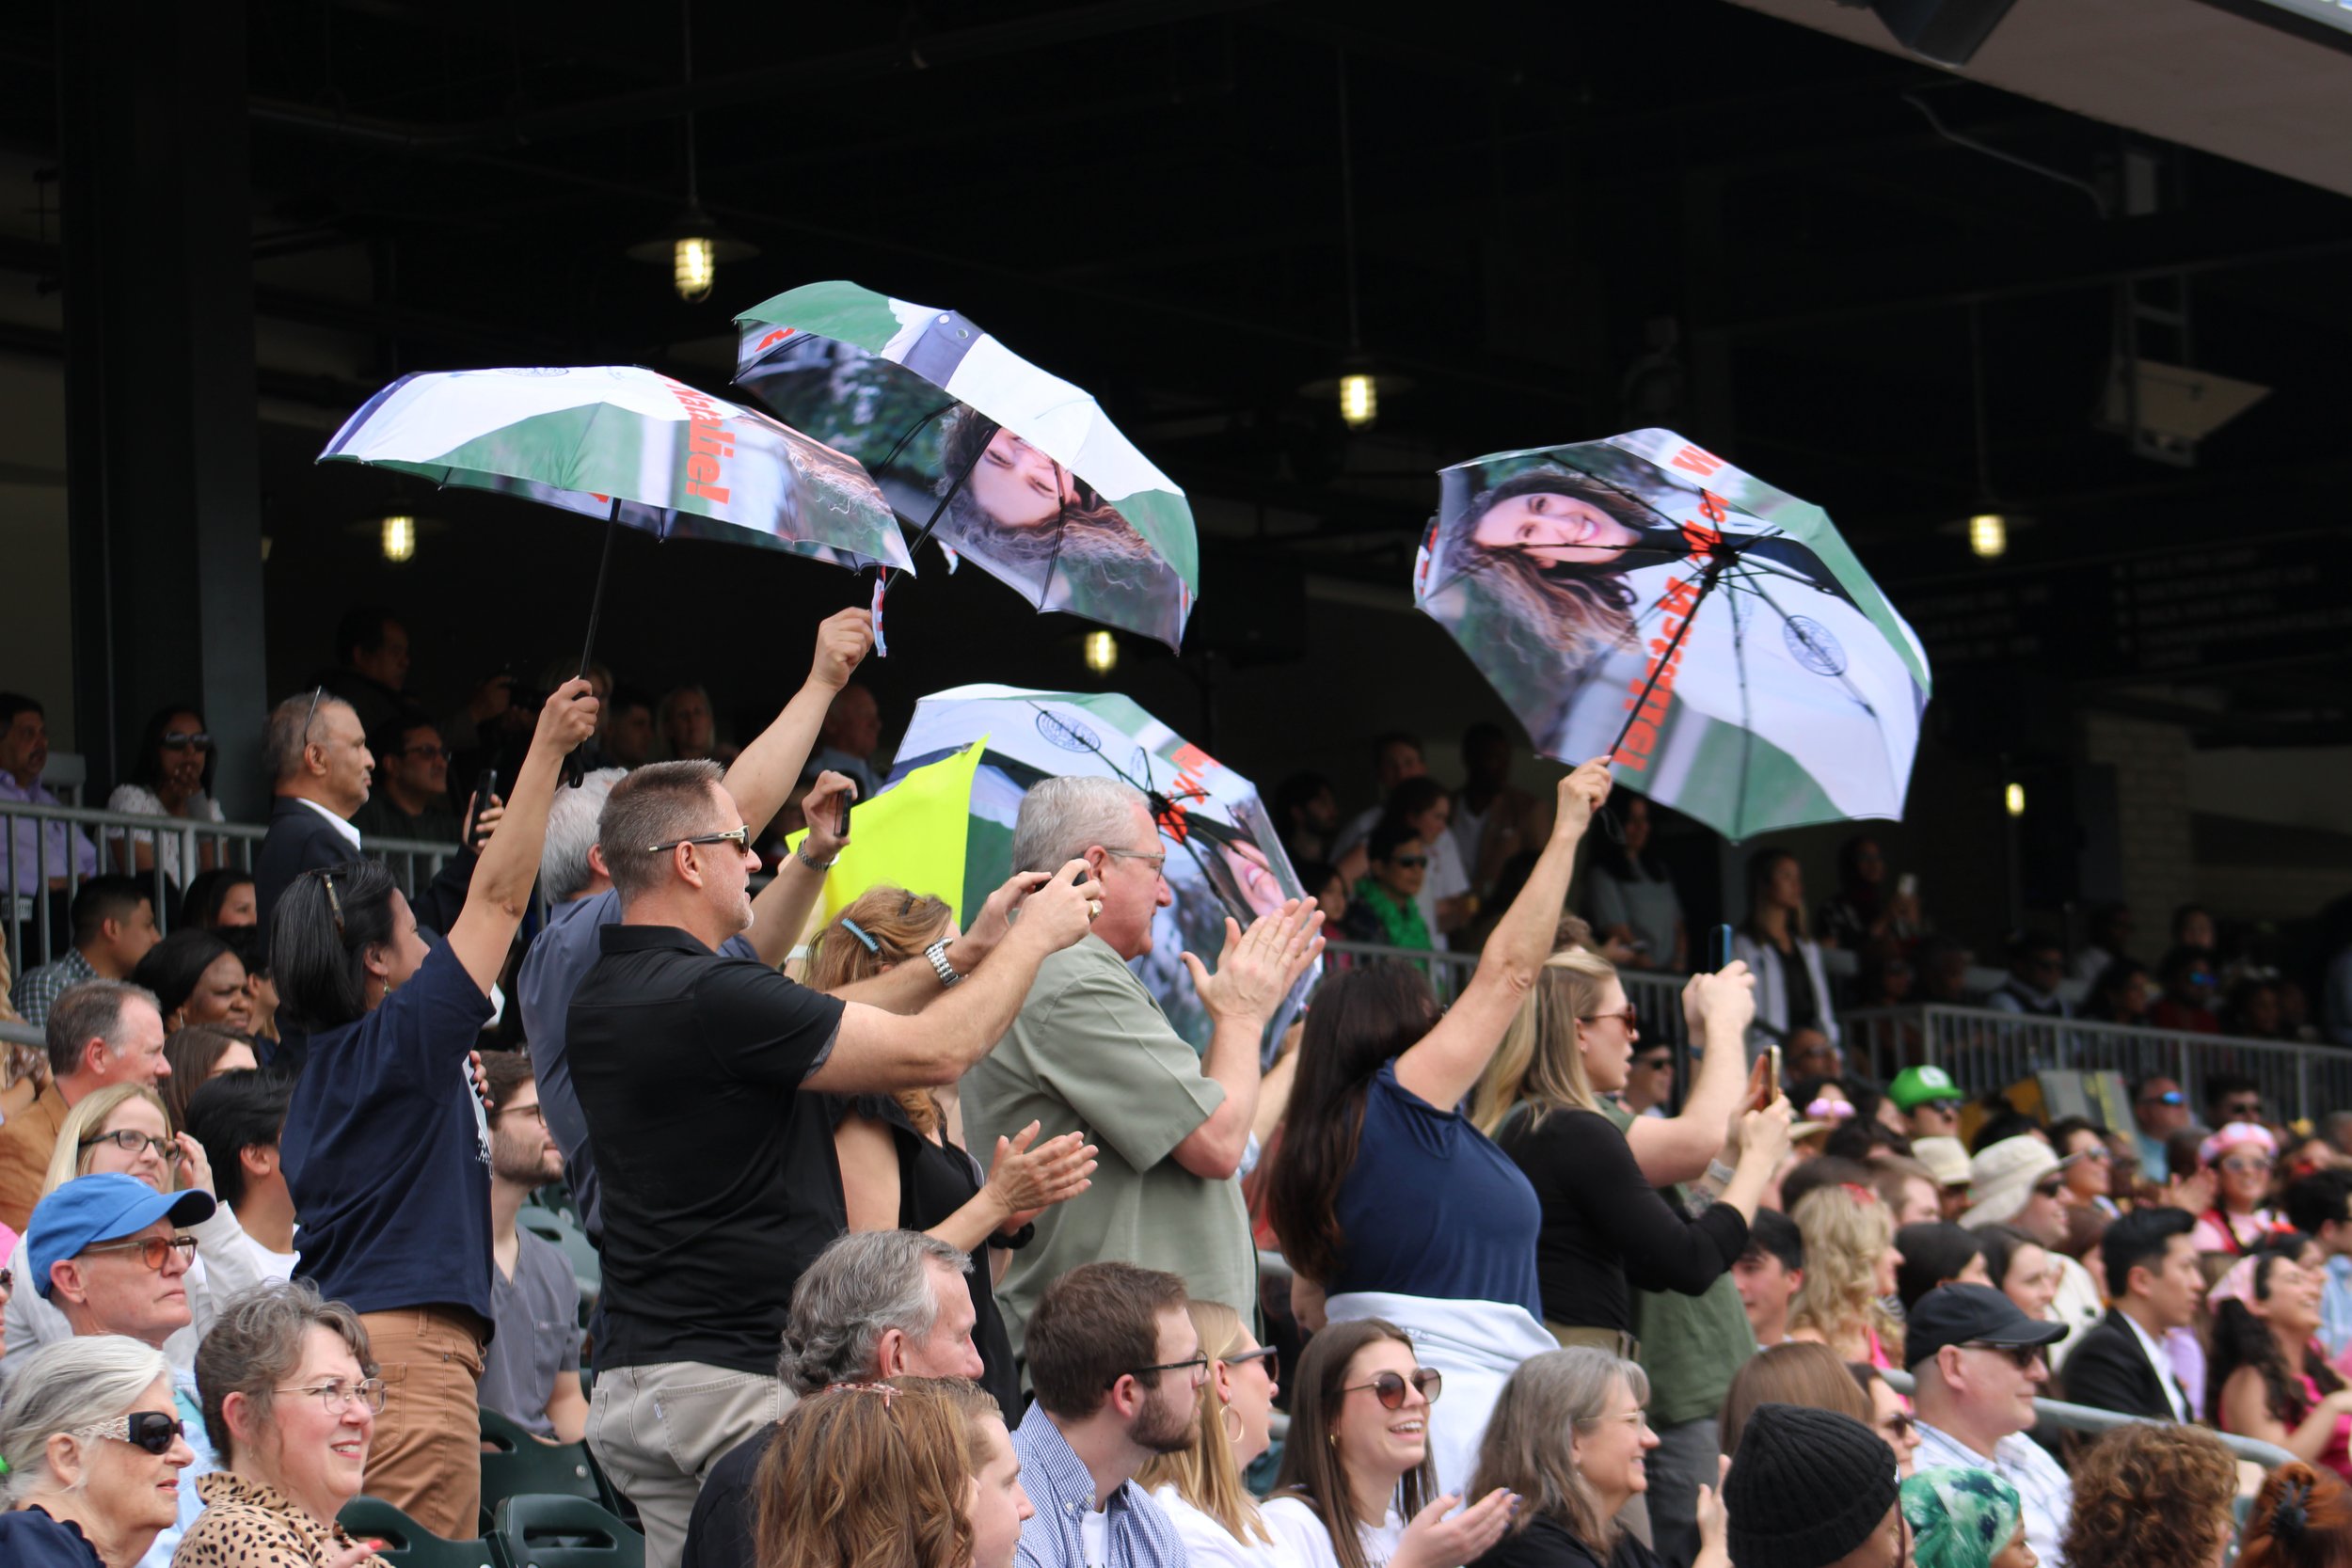  Supporters cheer with customized umbrellas at Match Day on March 15. 